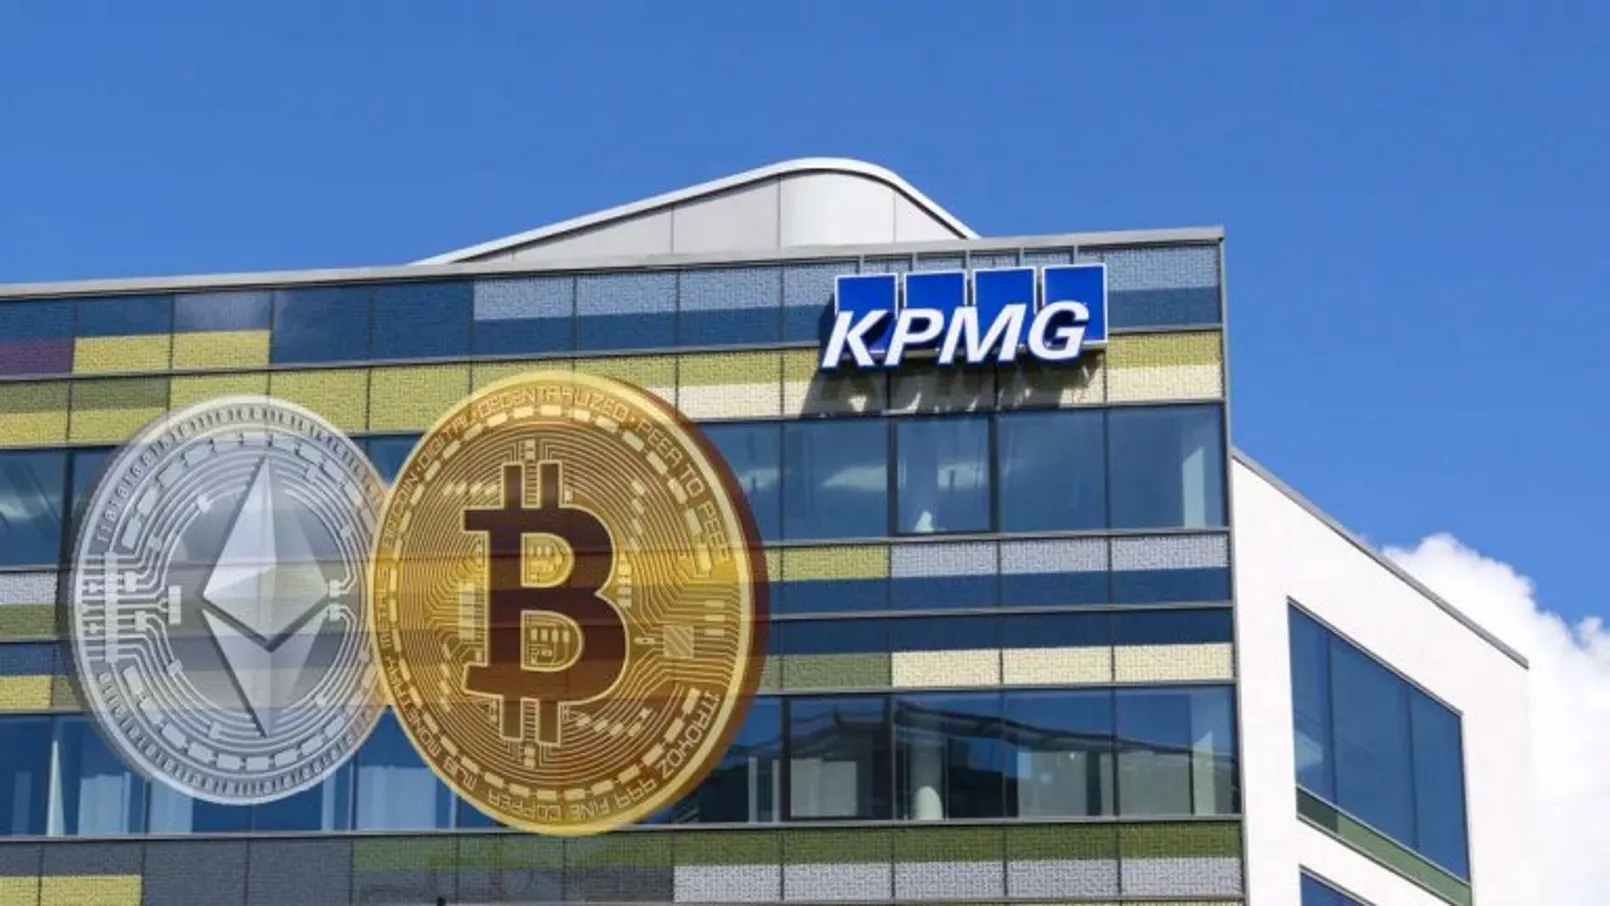 97 Kpmg in Canada Adds Btc and Eth to Its Treasury 768x432 1.jpg